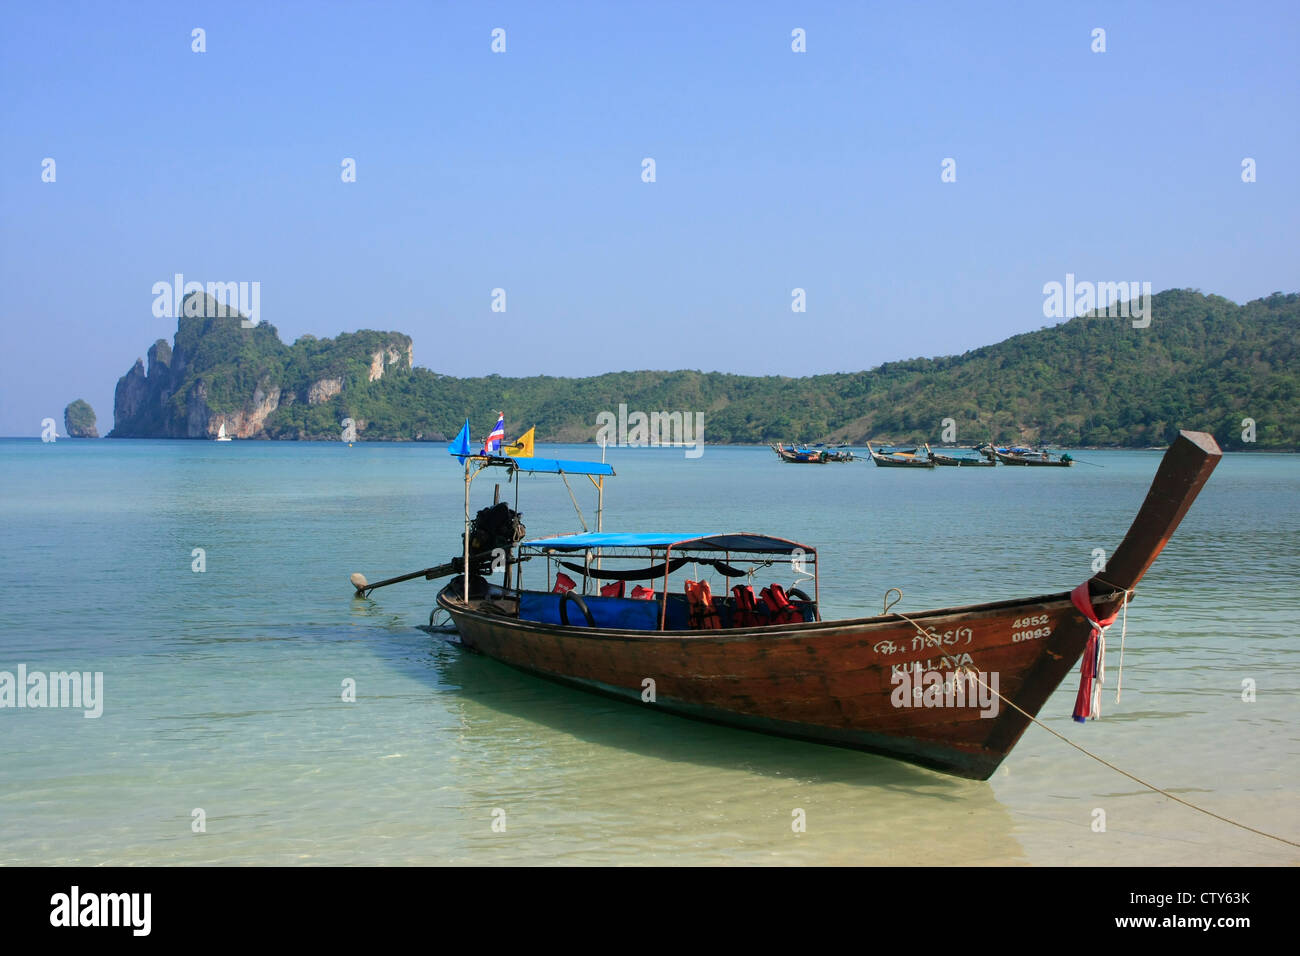 Longtail boat at the beach, Phi Phi Don island, Thailand Stock Photo